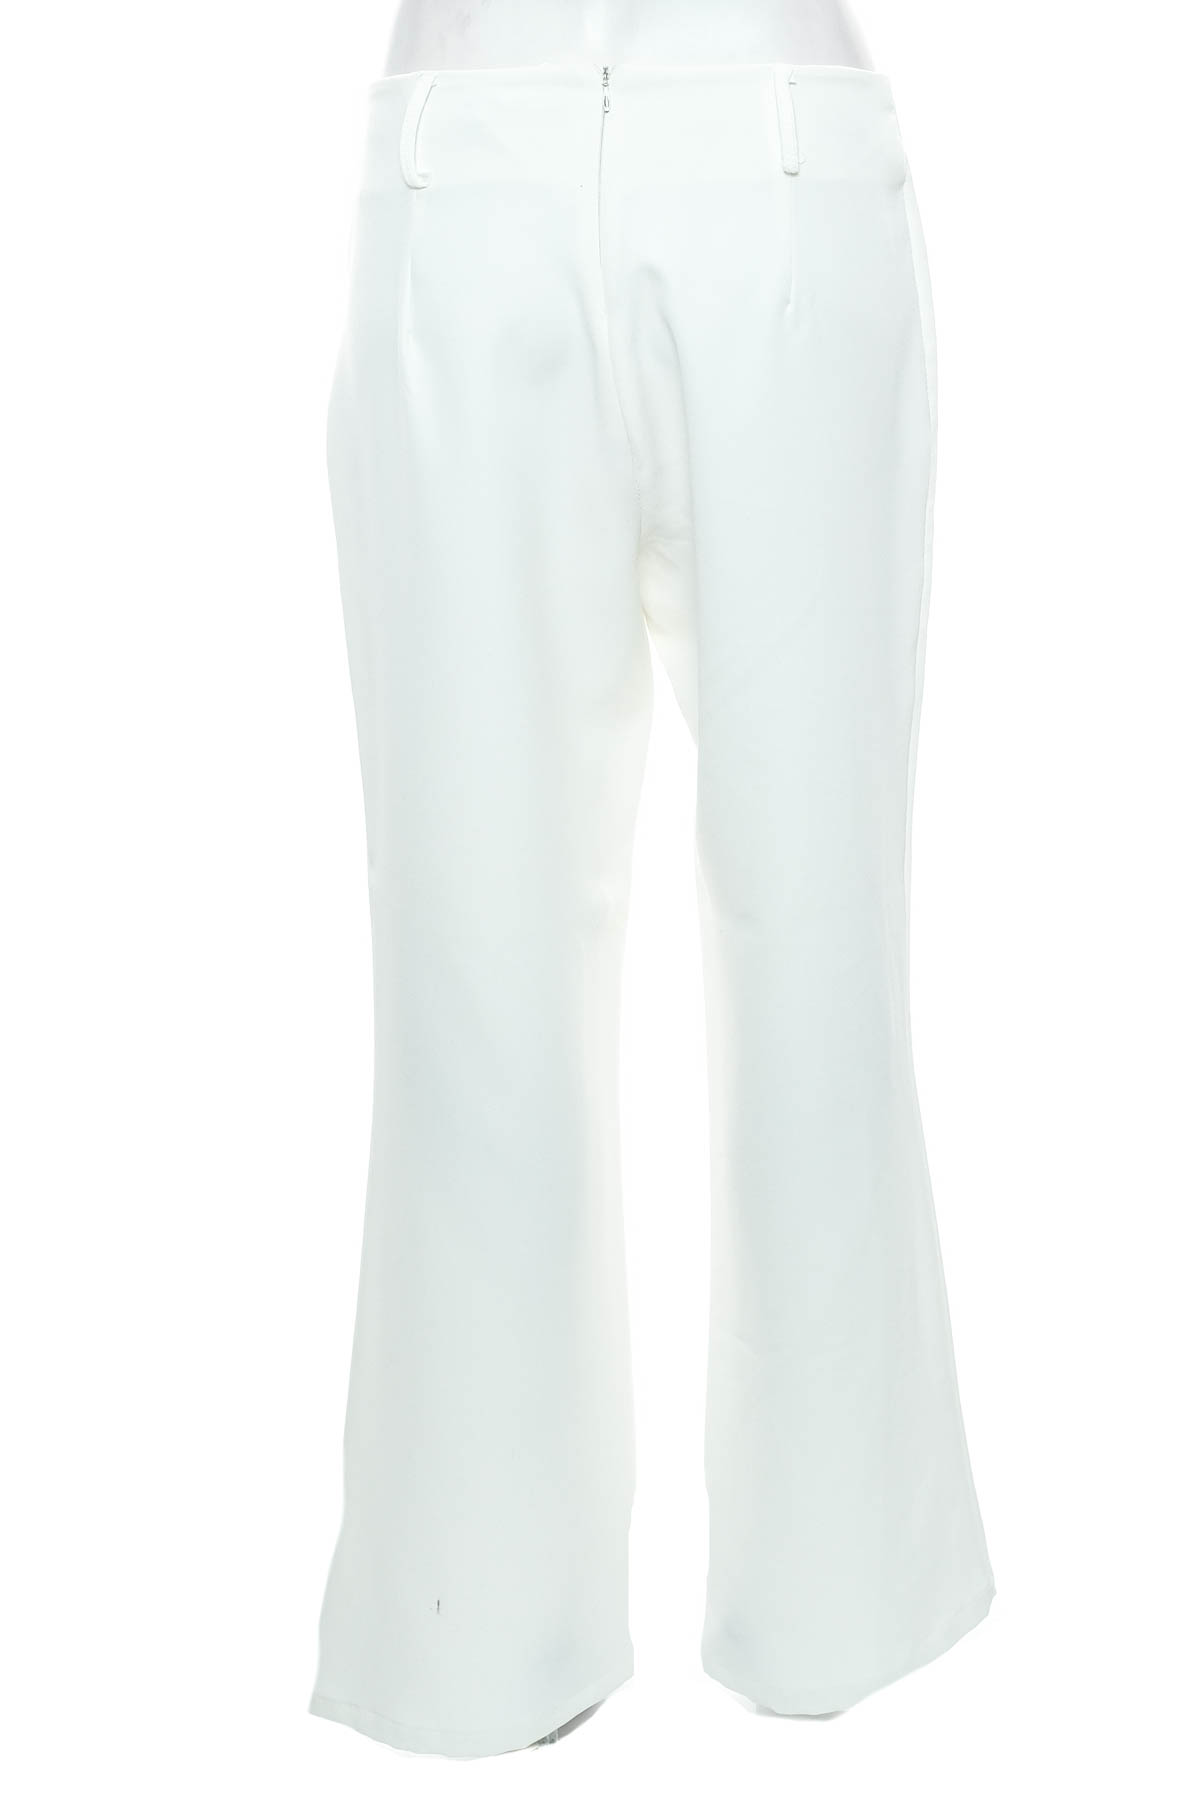 Women's trousers - MW MOST WANTED - 1